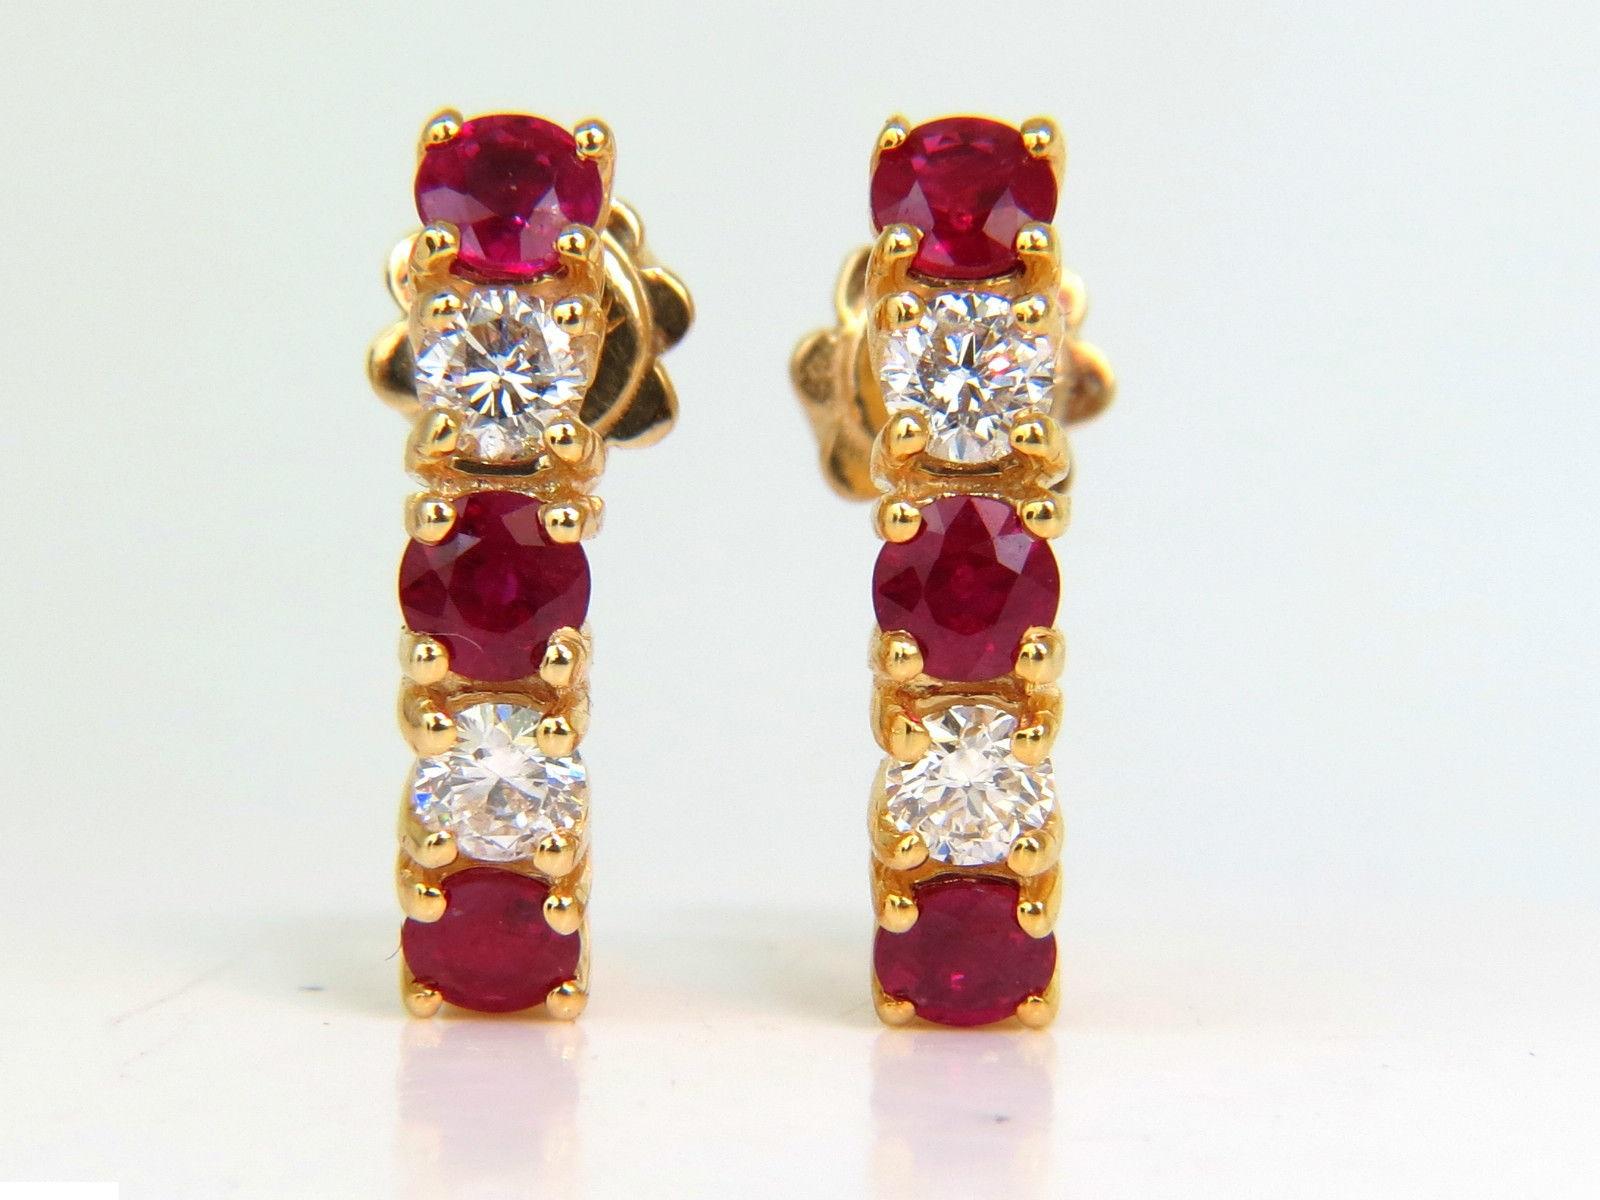 Round Cut 2.48CT Natural Rounds Fine Gem Red Ruby Diamond Earrings Semi Hoop 14KT